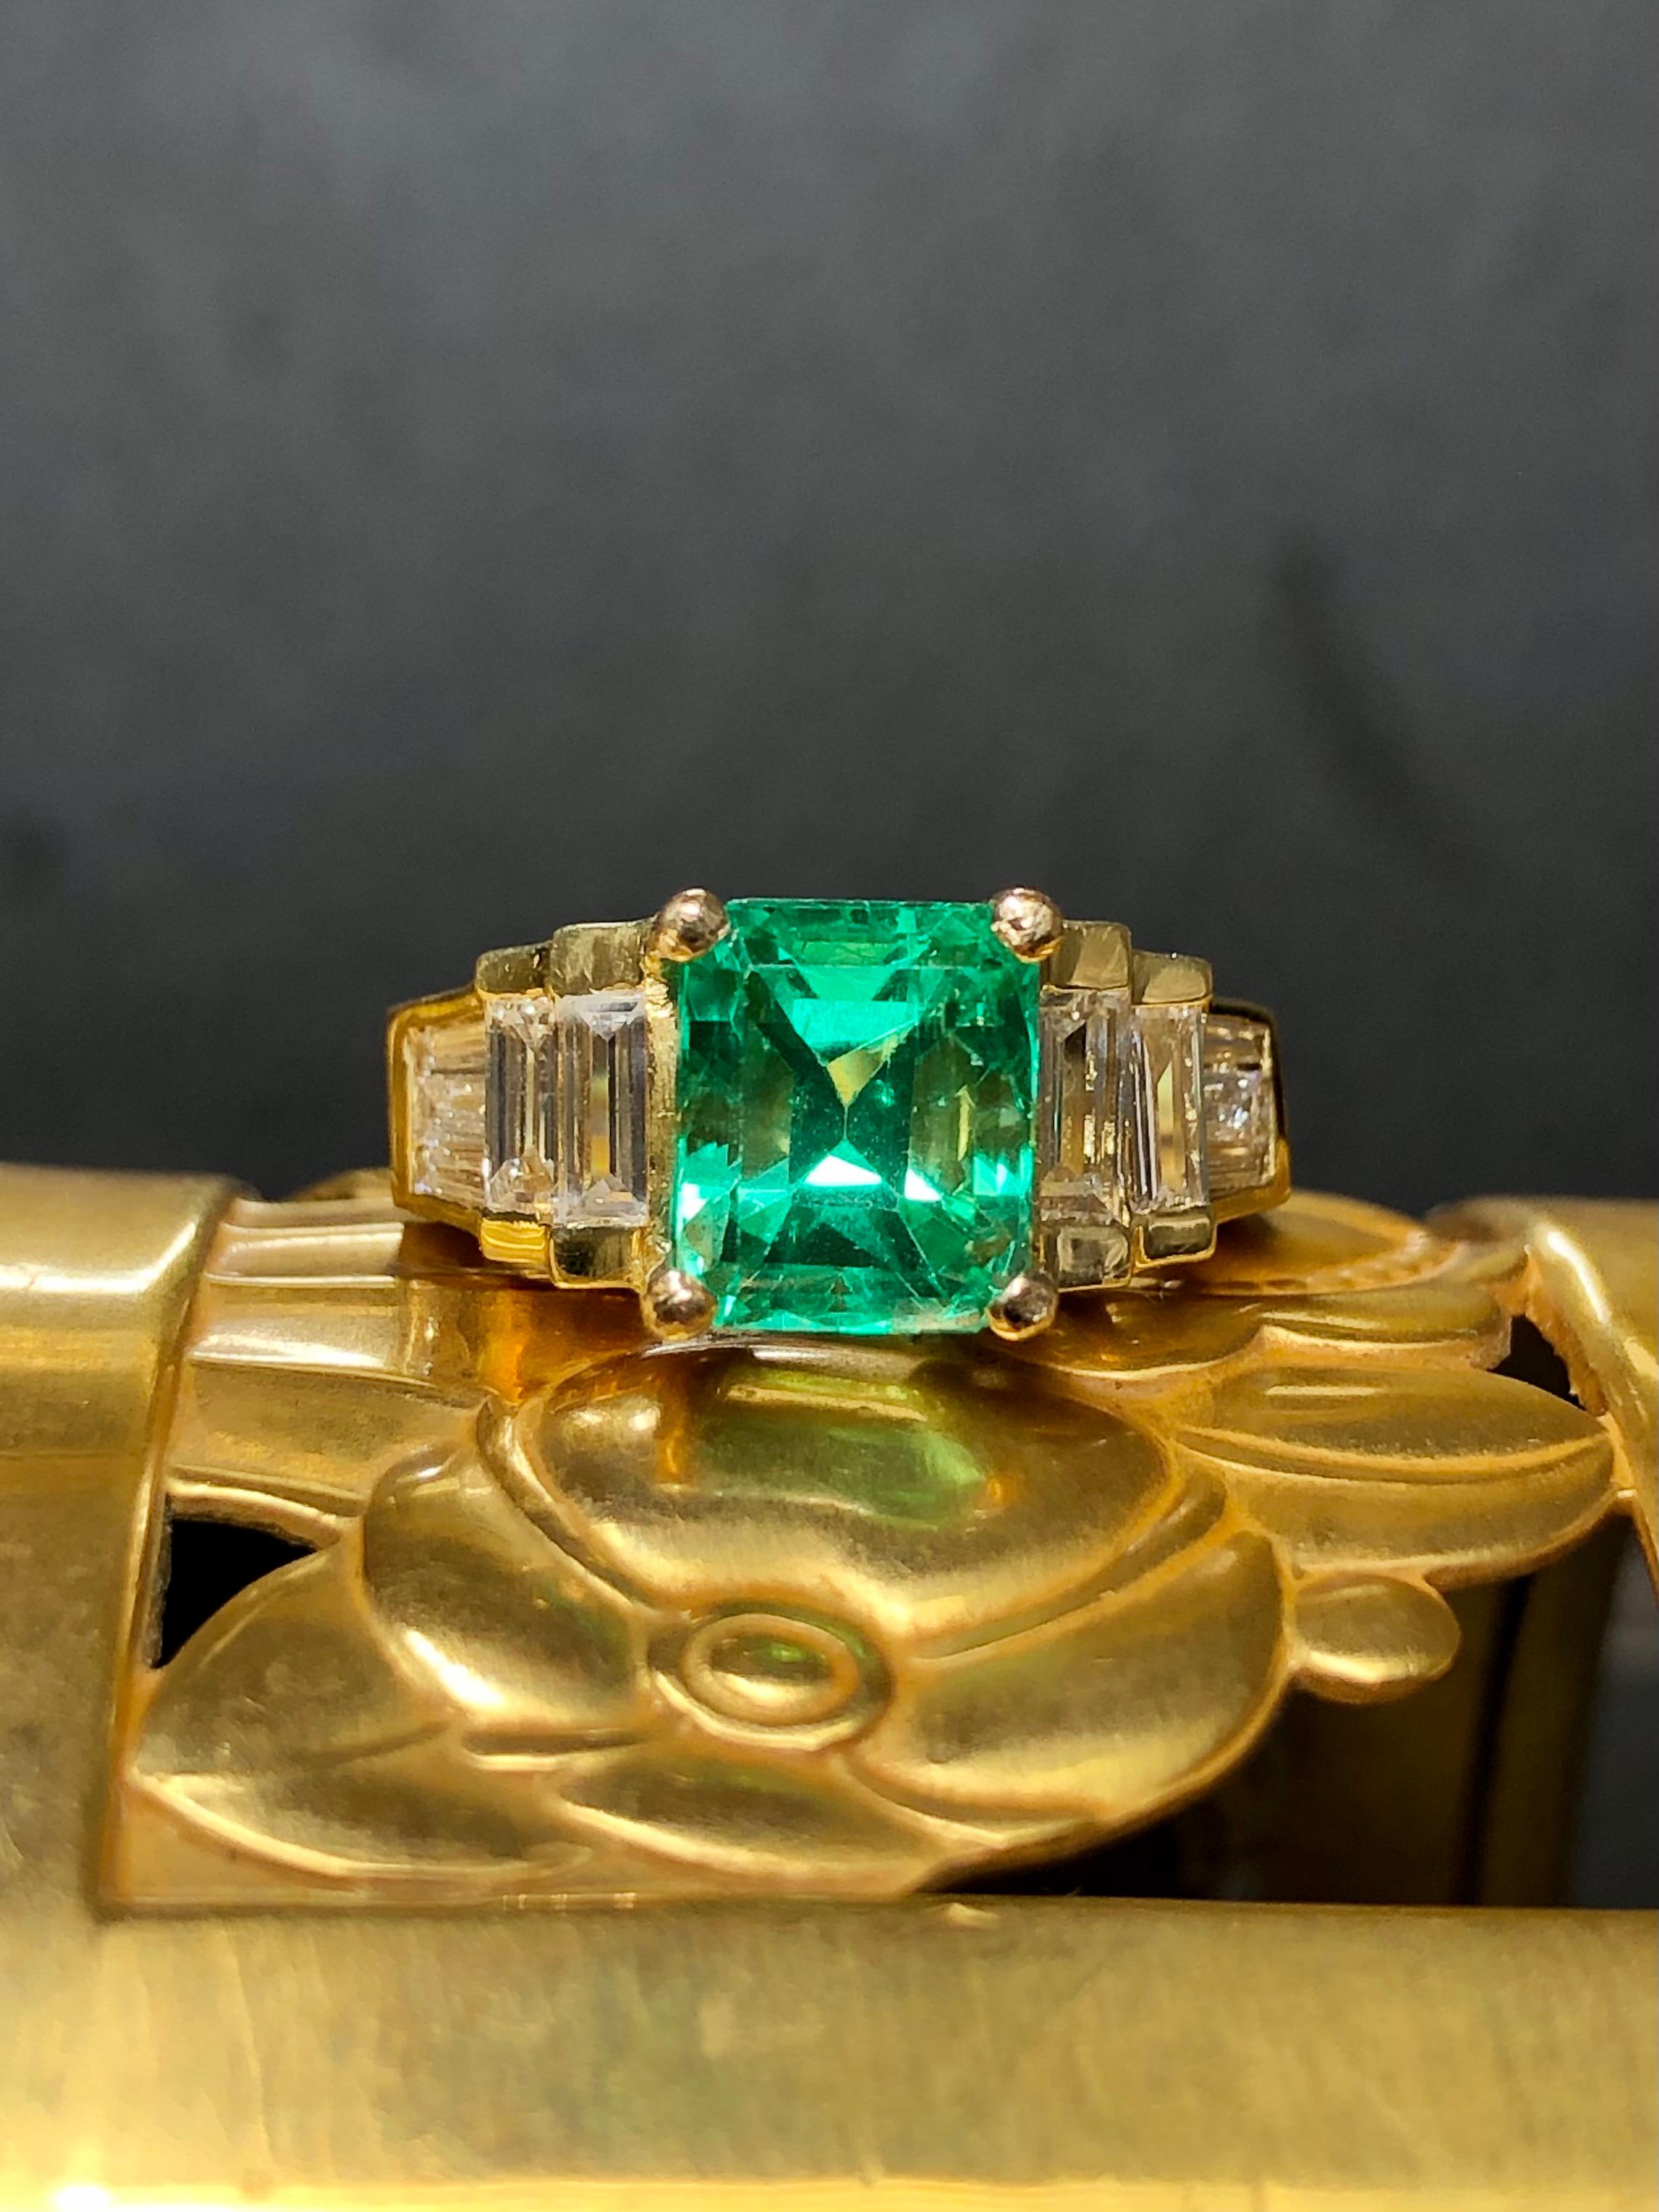 An impressive 2.62ct EYE CLEAN and minty color Colombian emerald set in a classic 18K yellow gold baguette diamond mount. The center stone has been inspected by GIA and has a Colombian origin and an F1 clarity rating. The material is gorgeous and